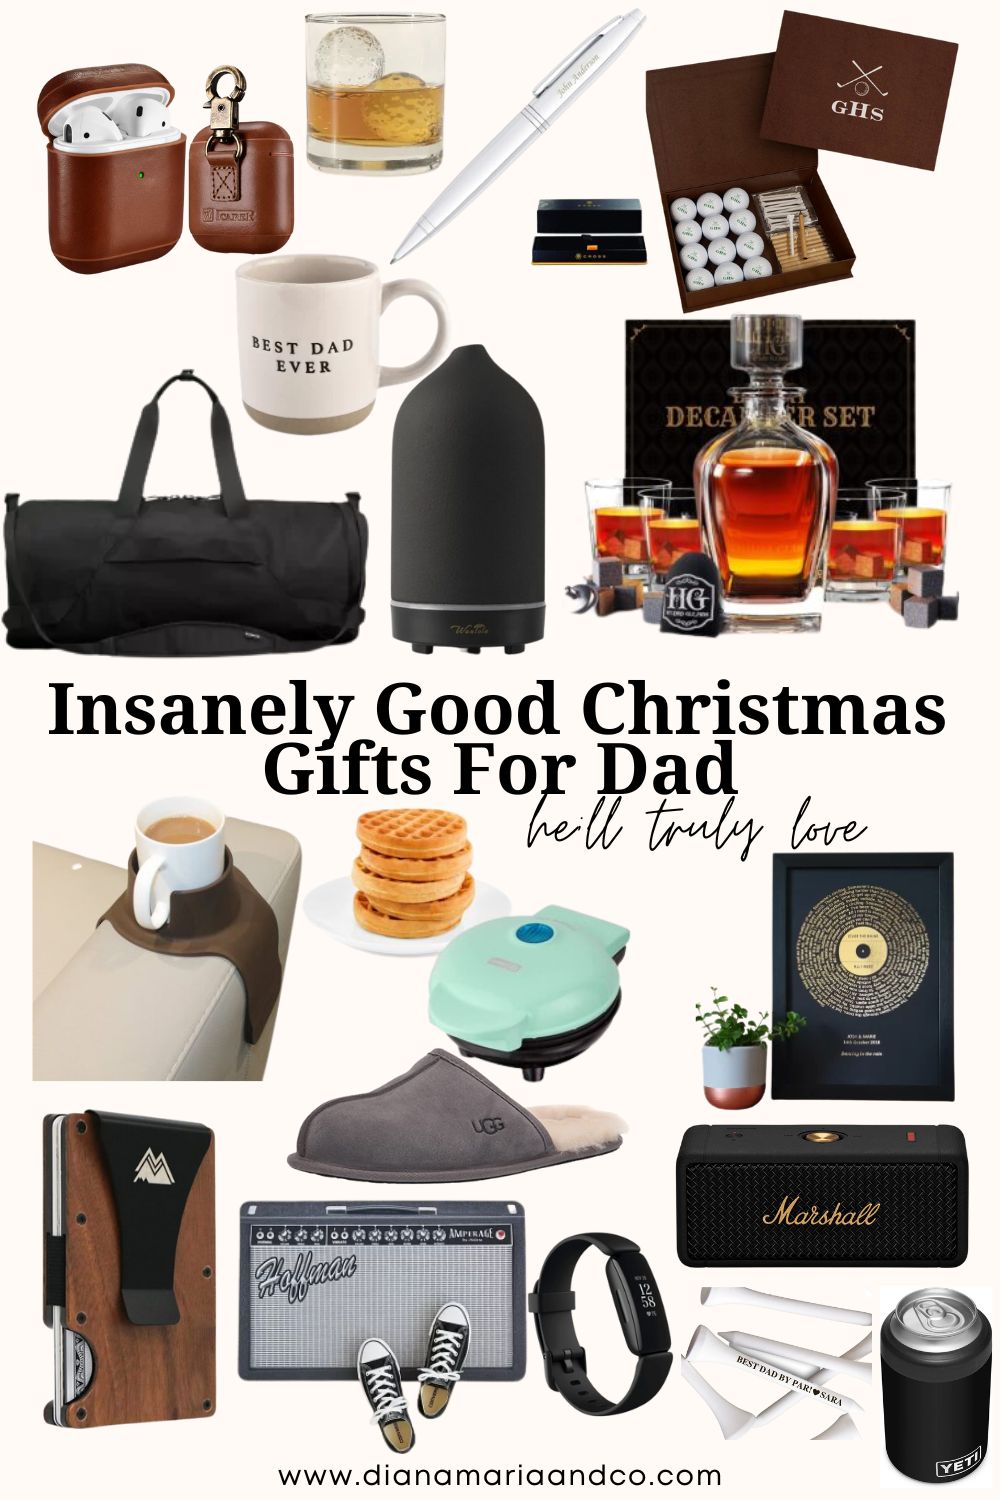 http://www.dianamariaandco.com/wp-content/uploads/2022/11/Christmas-Gifts-For-Dad-5.jpg